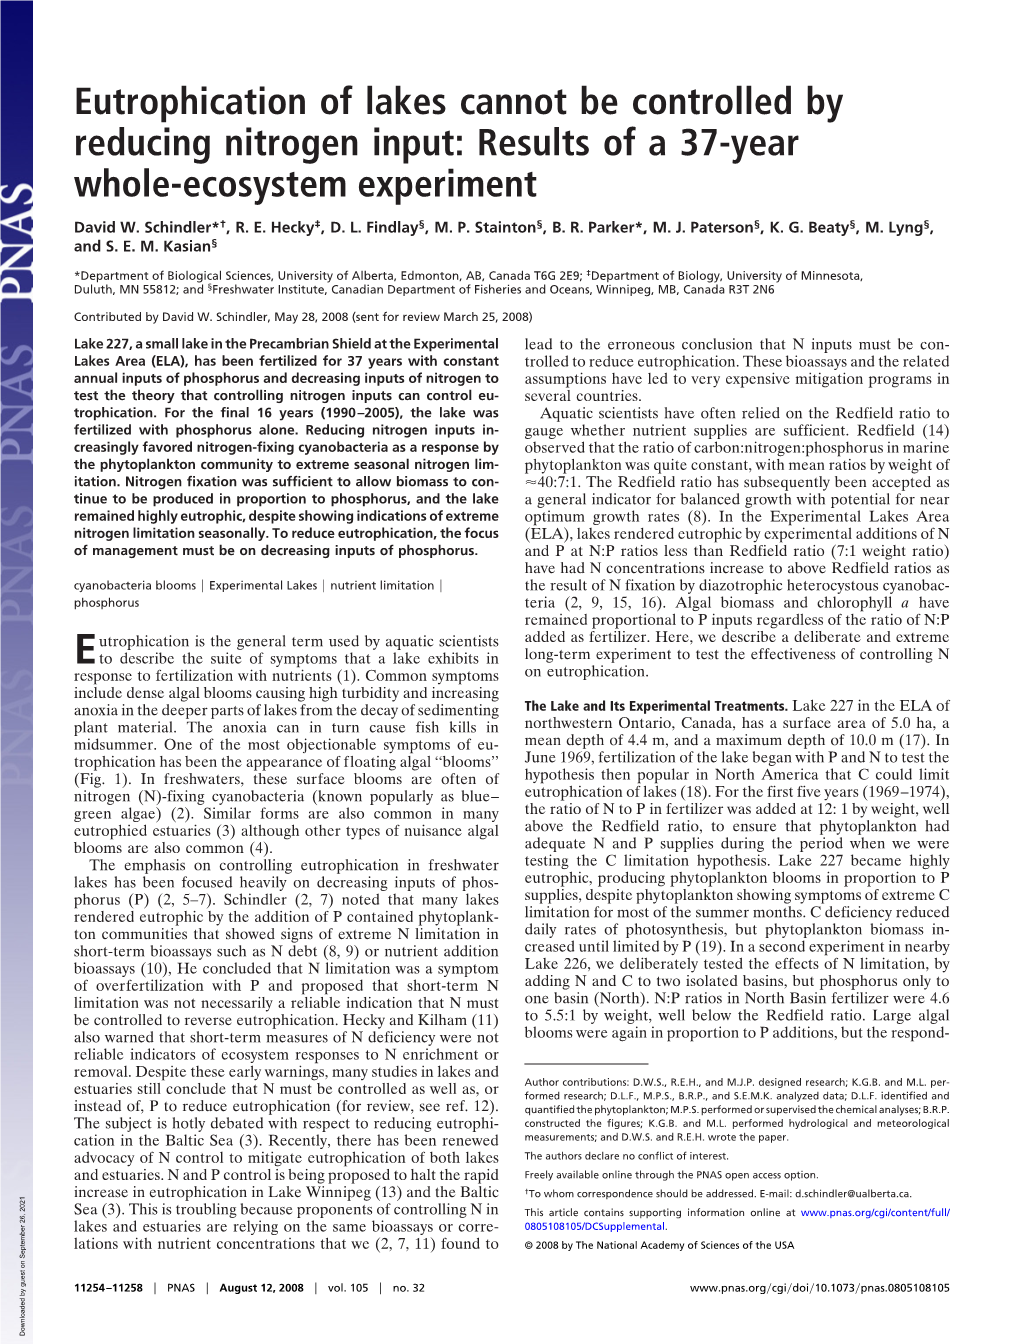 Eutrophication of Lakes Cannot Be Controlled by Reducing Nitrogen Input: Results of a 37-Year Whole-Ecosystem Experiment